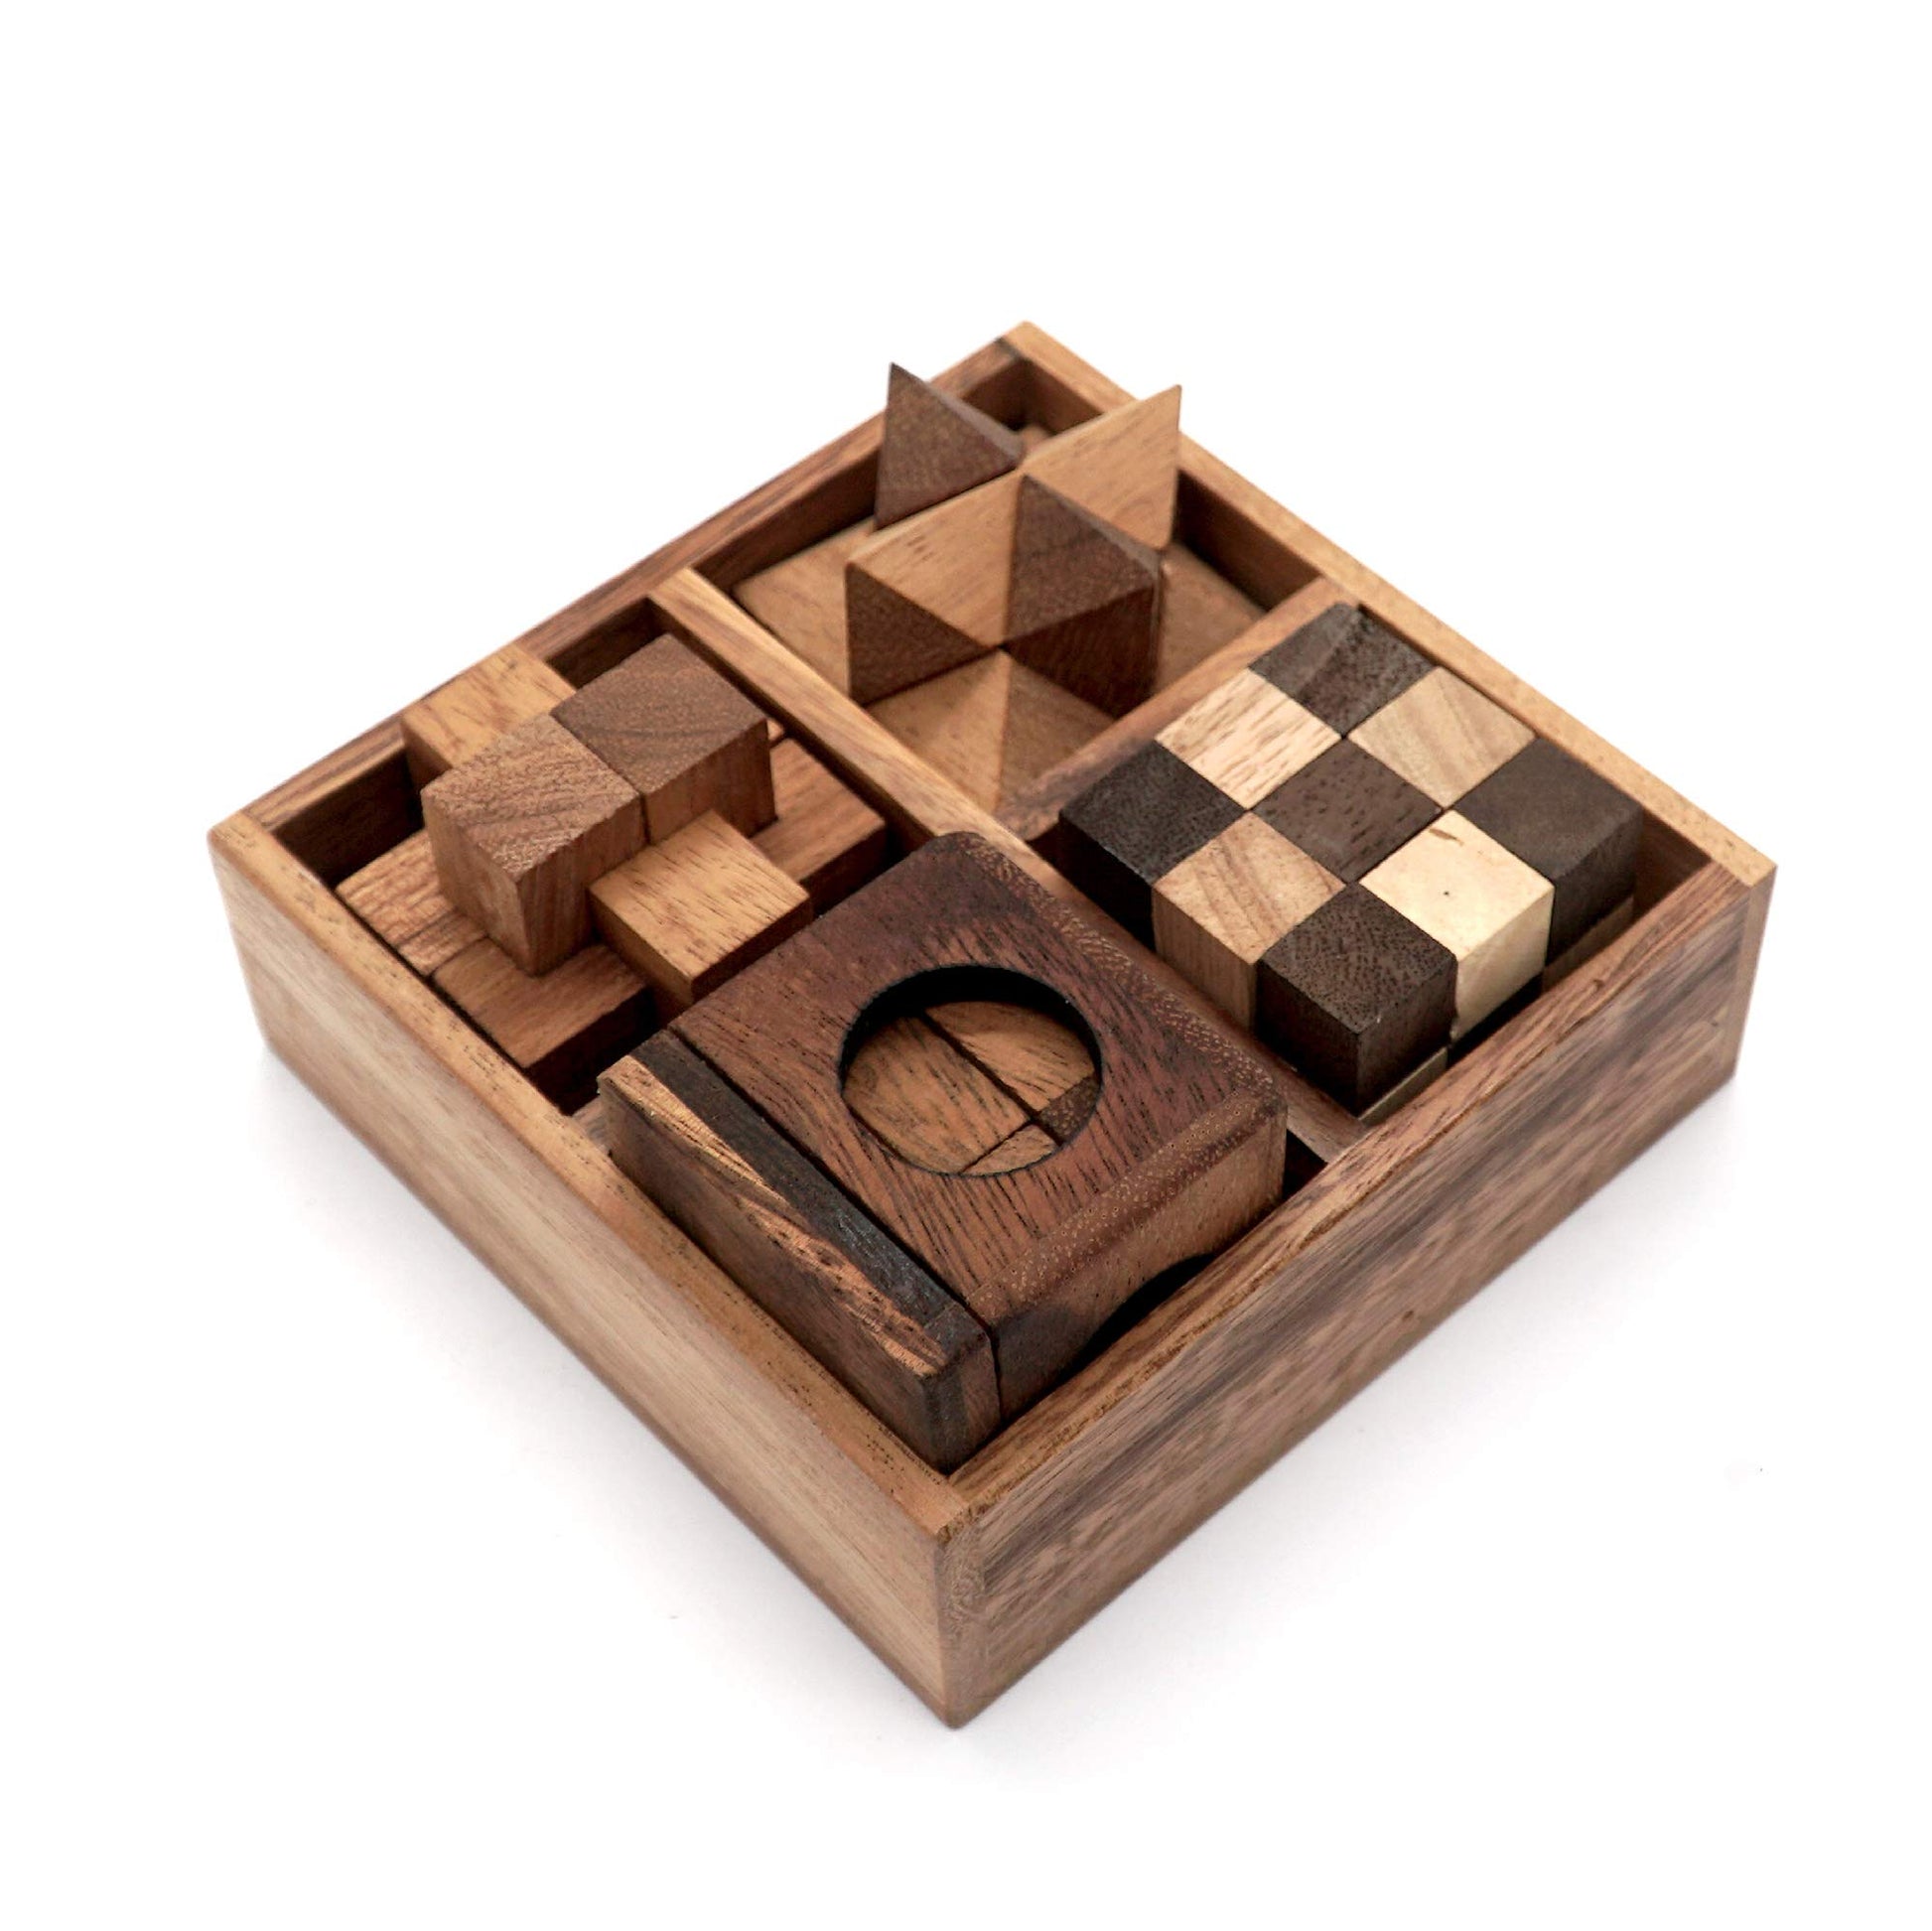 BSIRI Wooden Puzzle Box Set (4 Games) - Challenging Brain Teasers